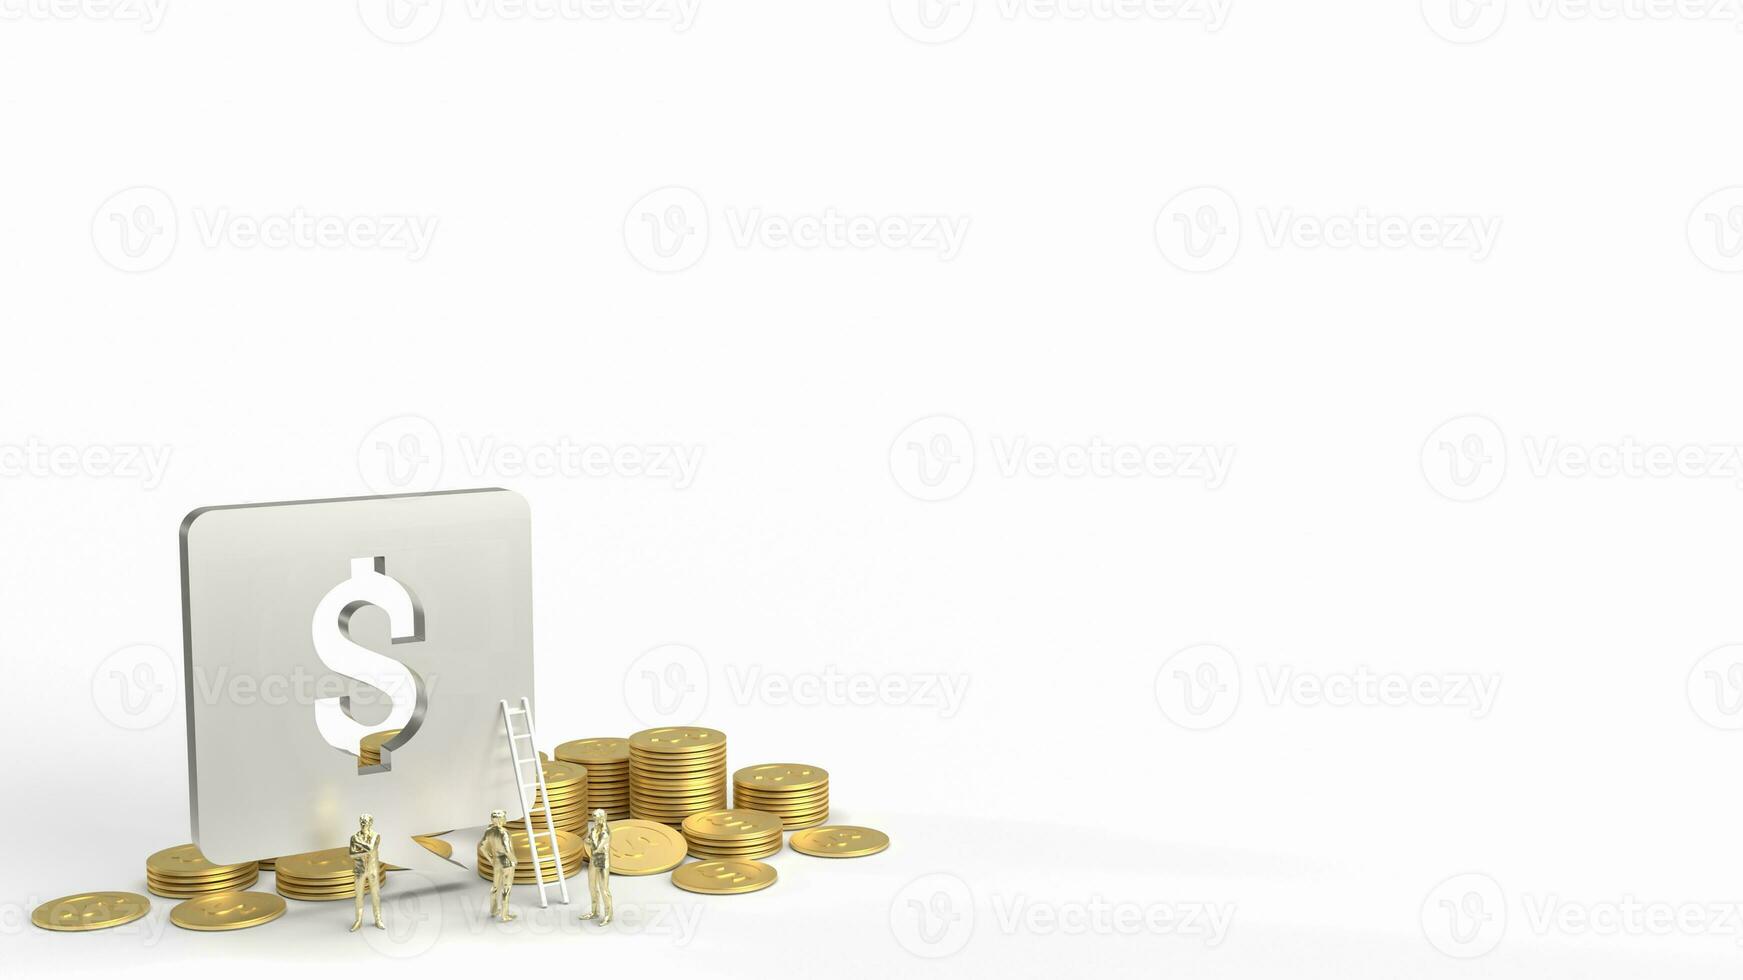 The Dollar symbol and gold coinson white Background for Business concept 3d Rendering photo